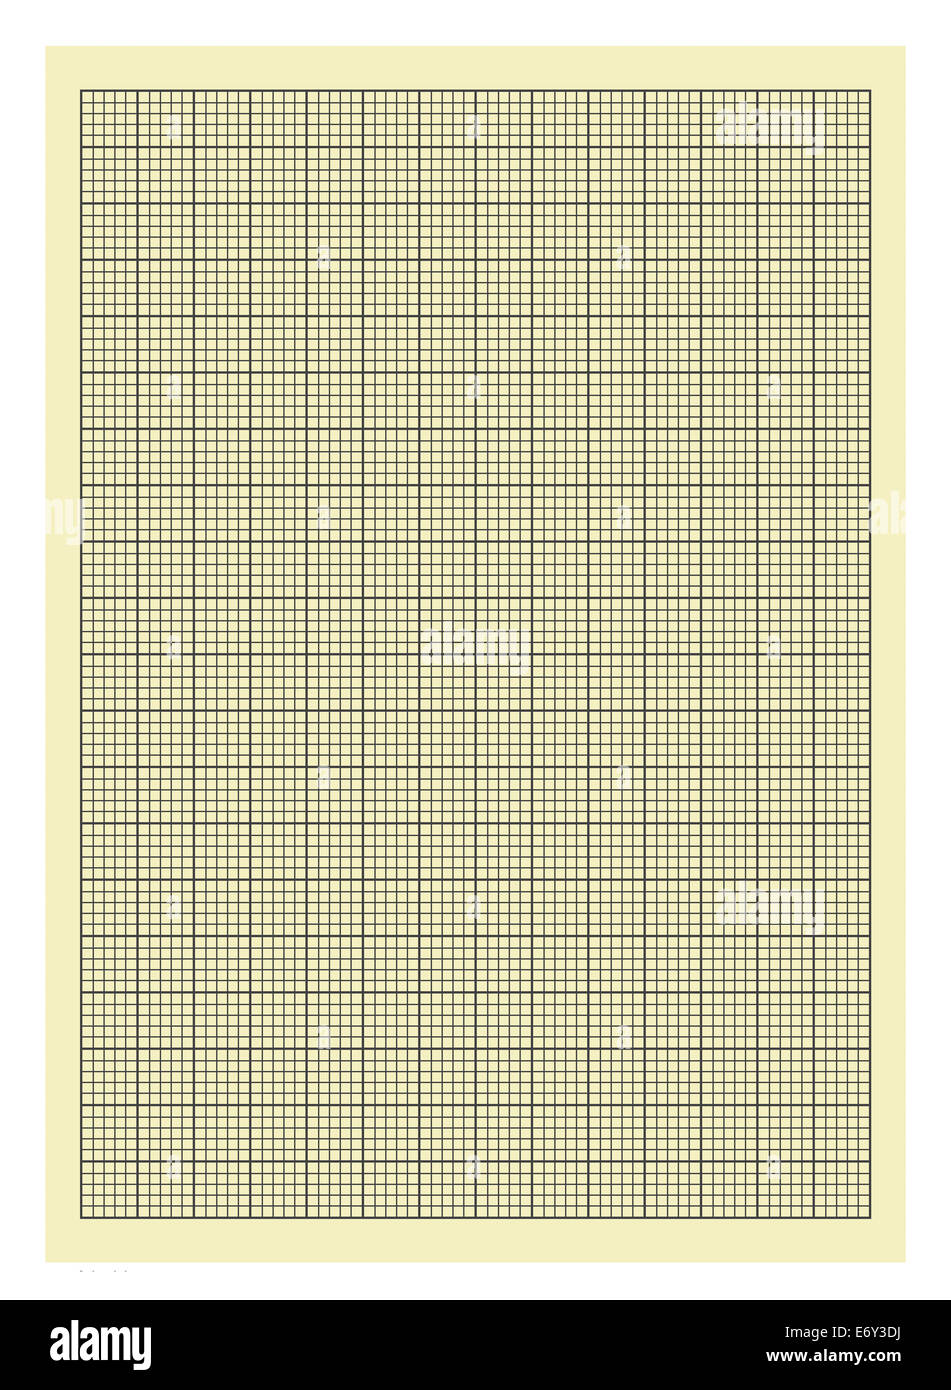 Yellow and Black Lined Graph Paper Isolated on White Background. Stock Photo